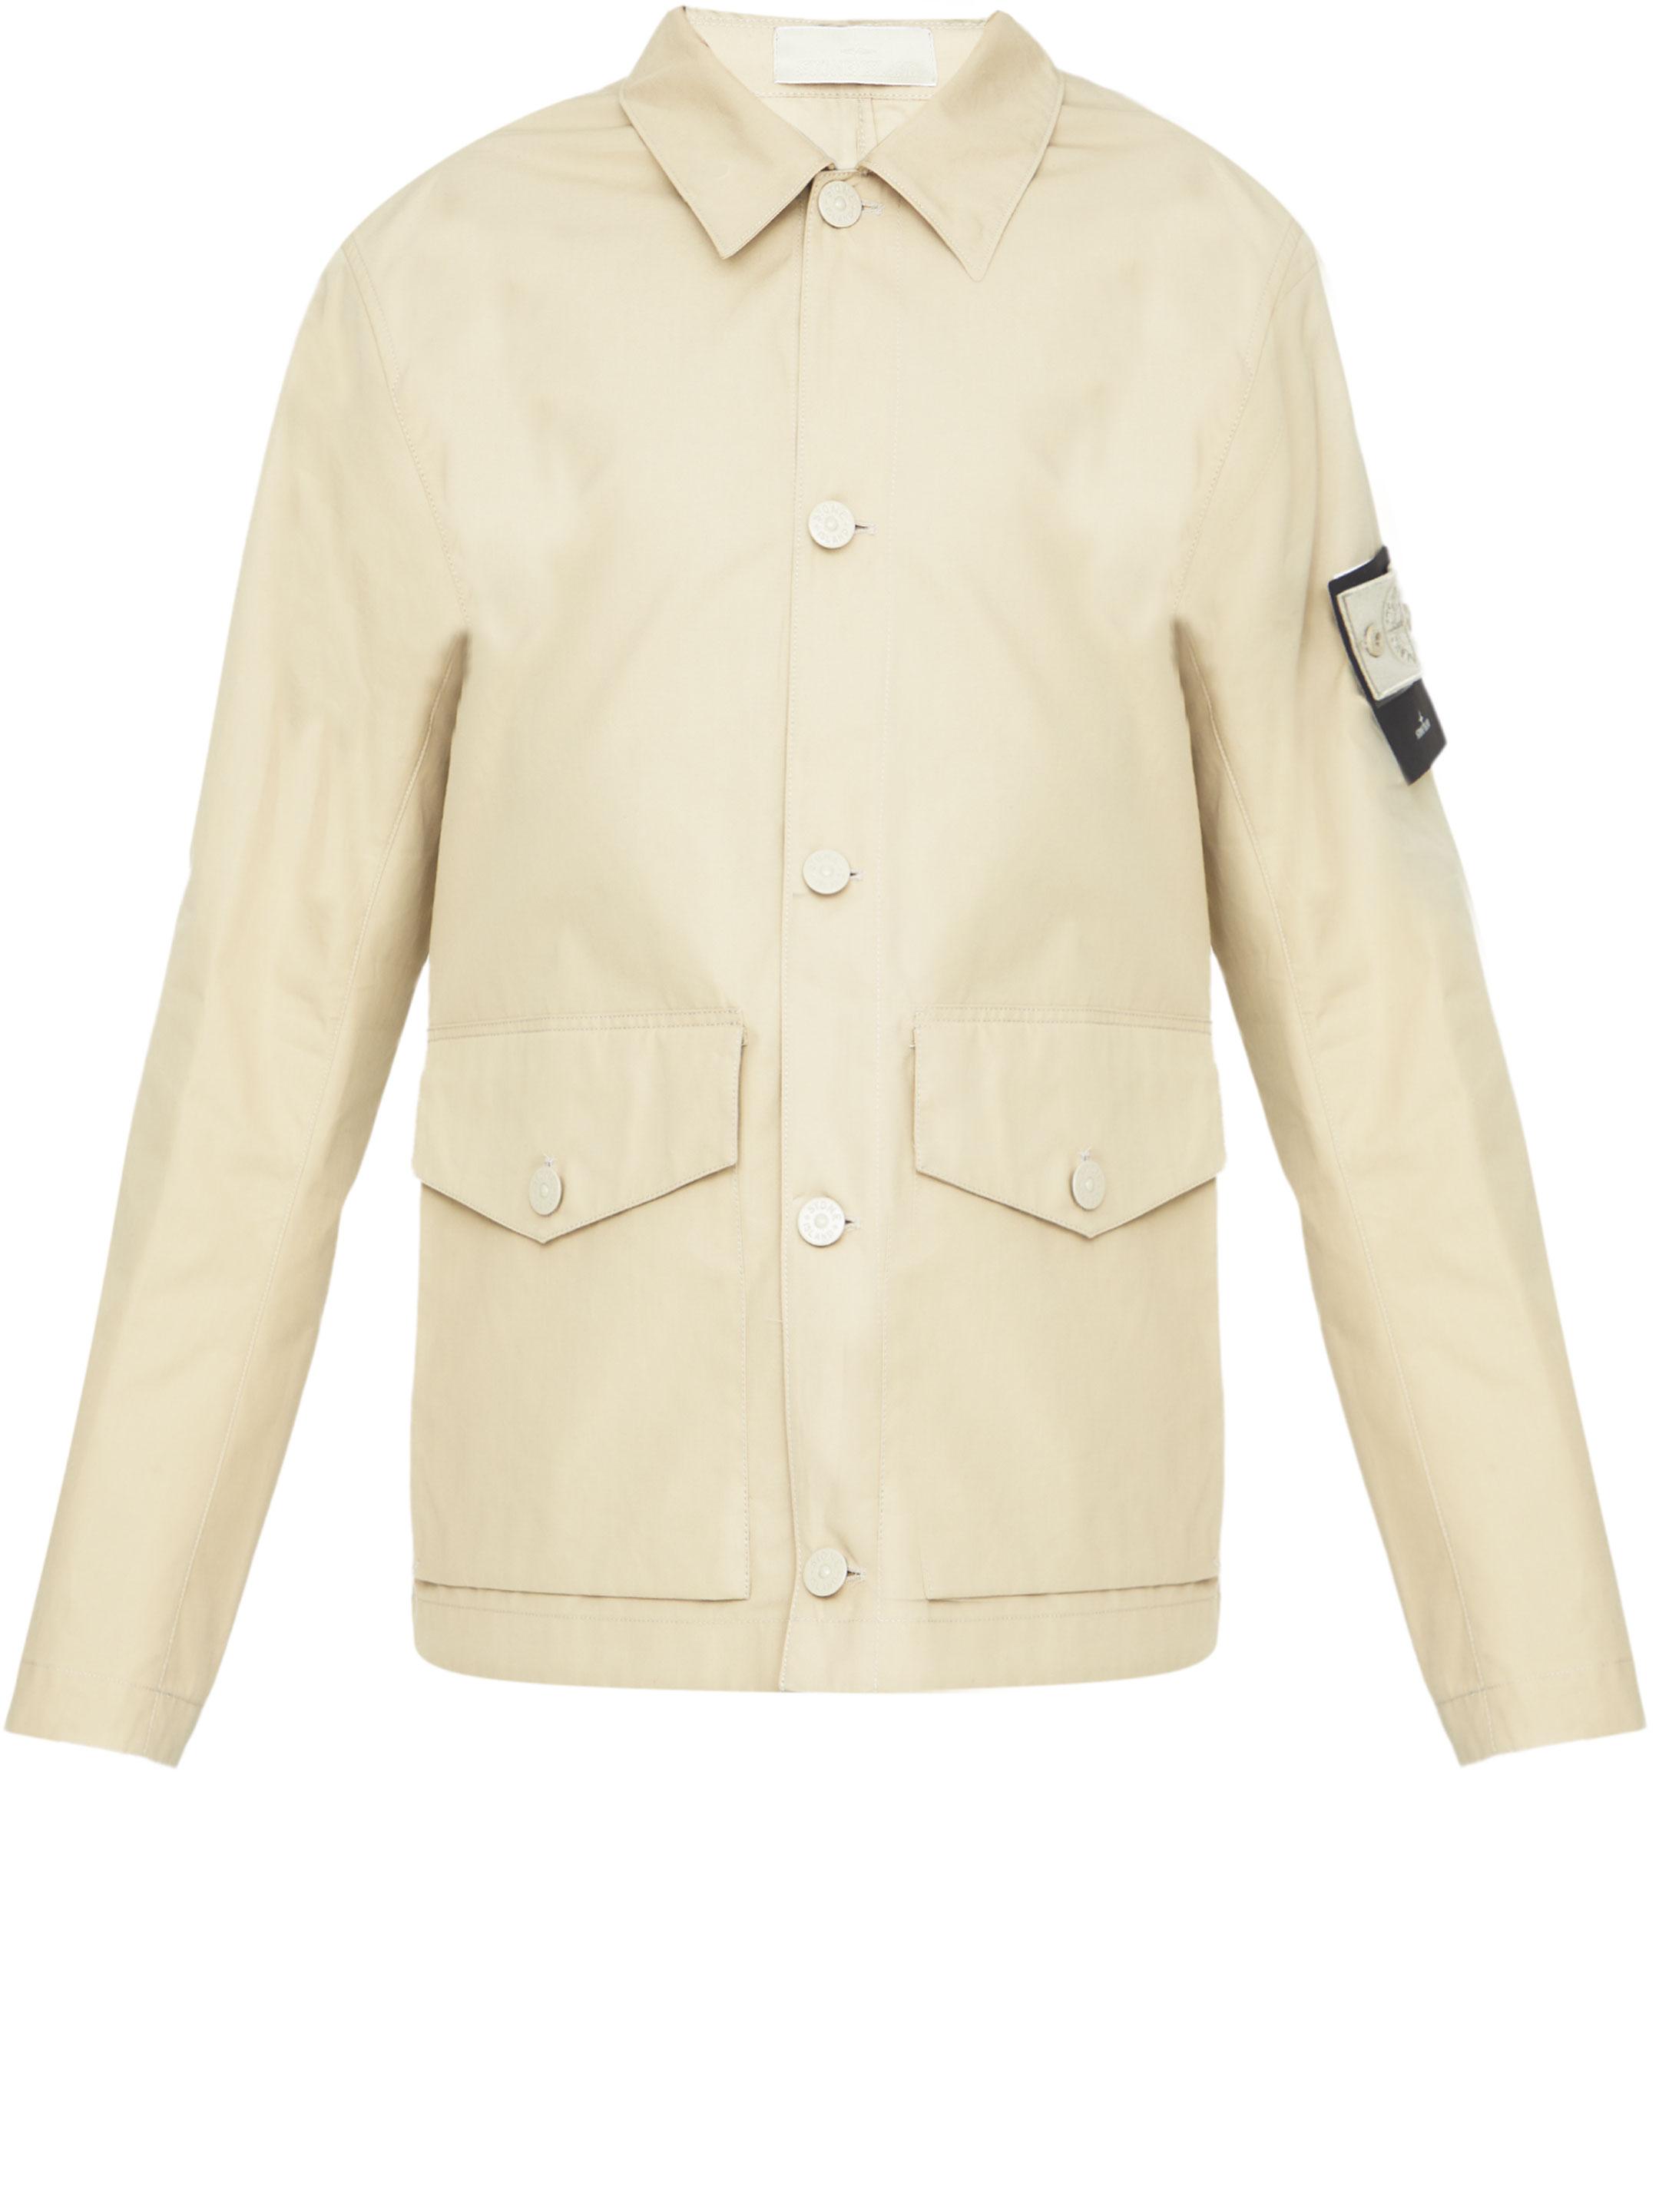 Stone Island Ghost Piece O-ventile Jacket in Natural for Men | Lyst